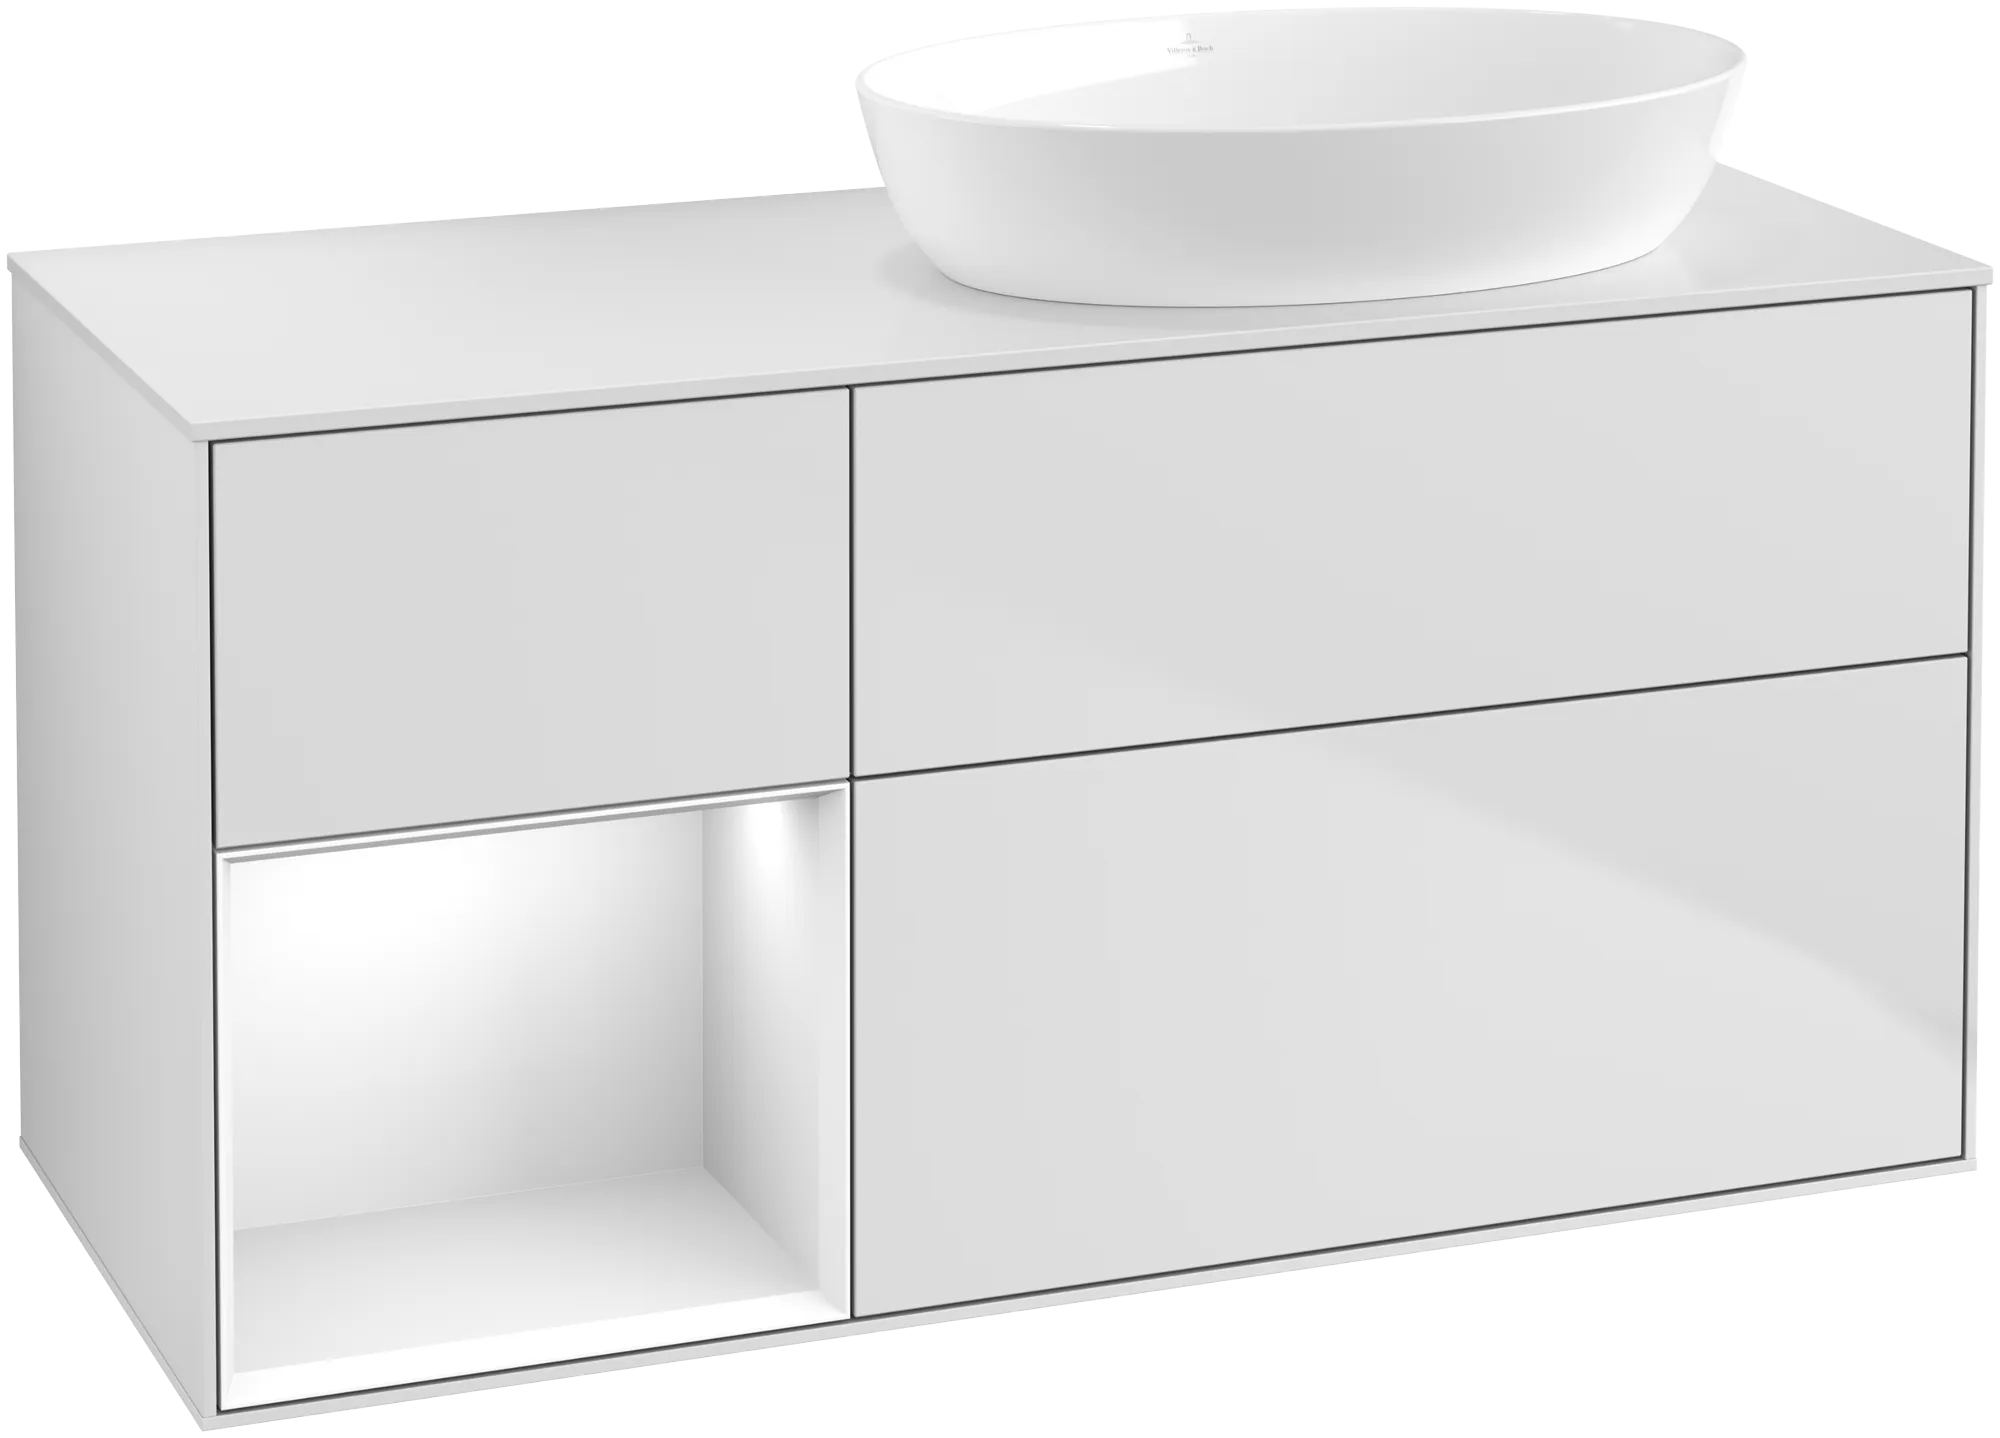 VILLEROY BOCH Finion Vanity unit, with lighting, 3 pull-out compartments, 1200 x 603 x 501 mm, White Matt Lacquer / Glossy White Lacquer / Glass White Matt #GA41GFMT resmi